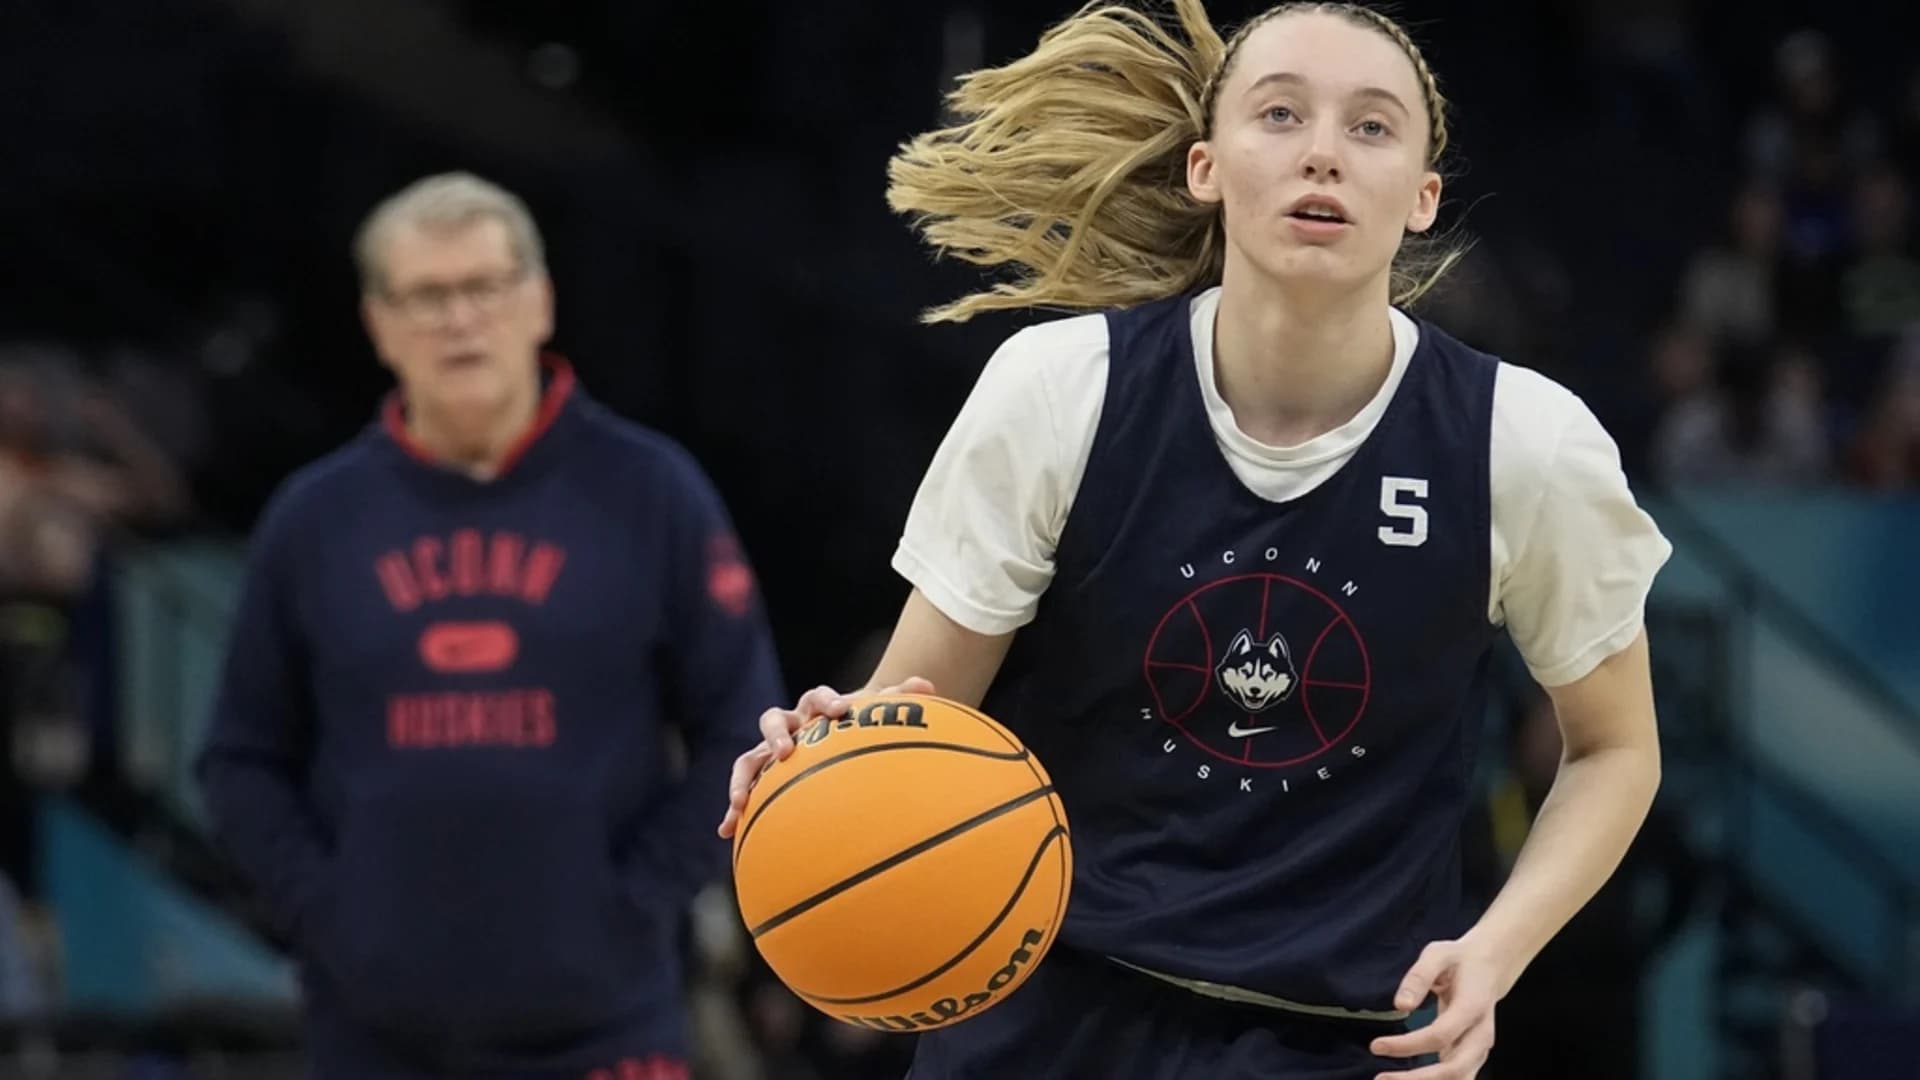 UConn star Paige Bueckers says she’s cleared to play a year after ACL injury